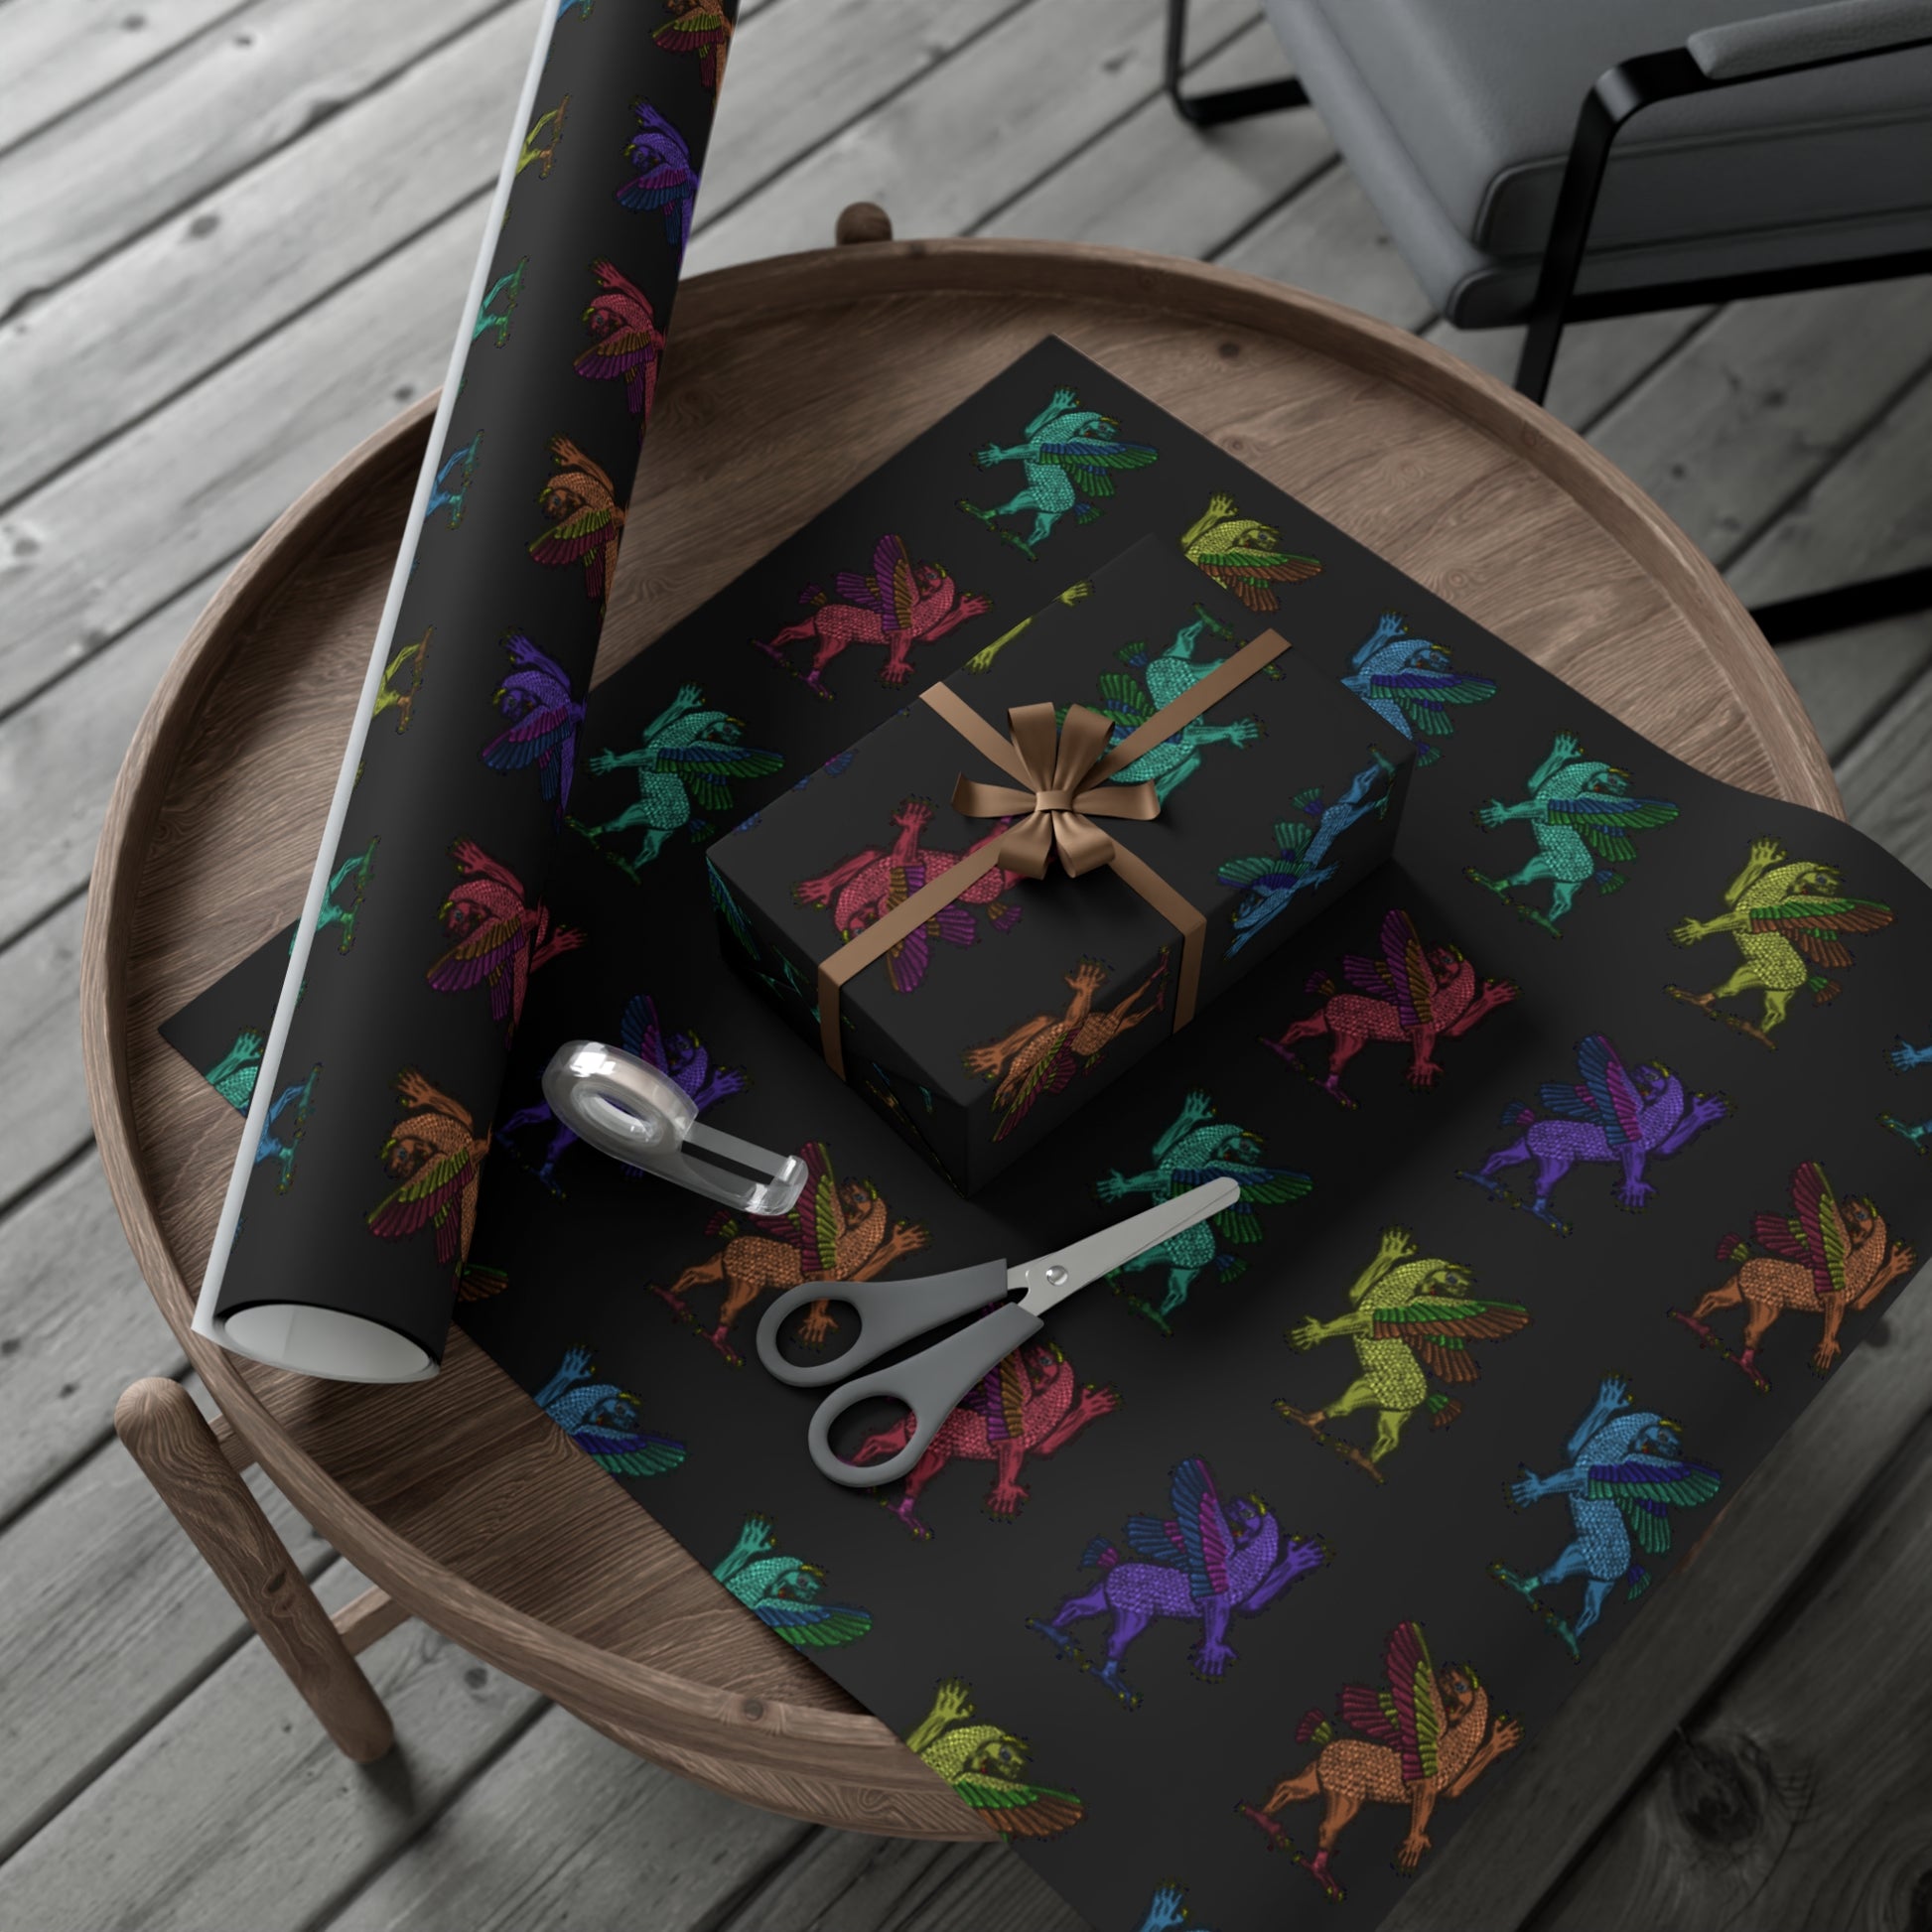 Black wrapping paper with a pattern of an ancient engraving of Tiamat in multiple colors.